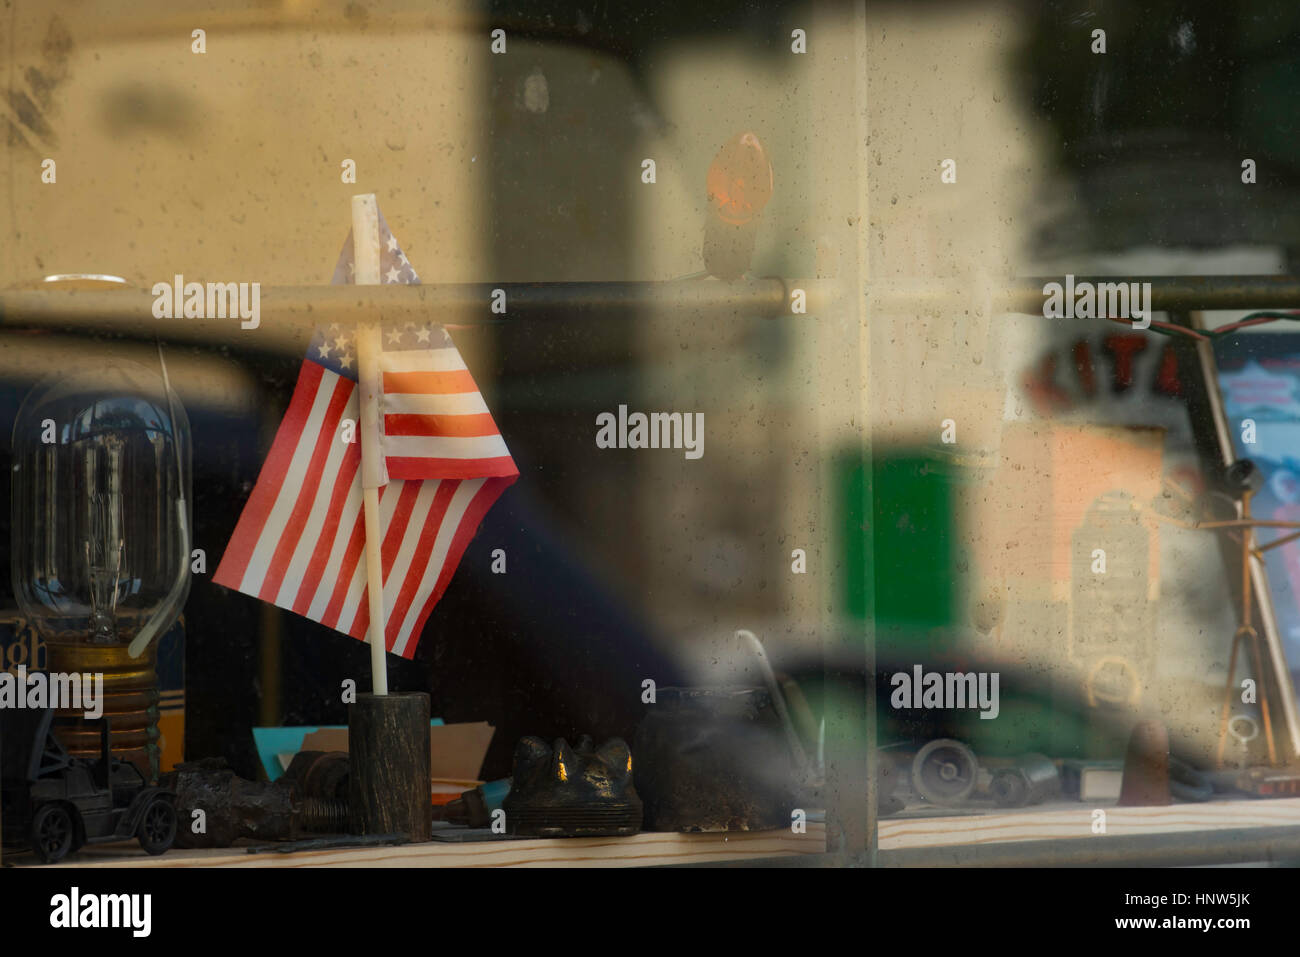 A small toy American flag is displayed in an old store window Stock Photo